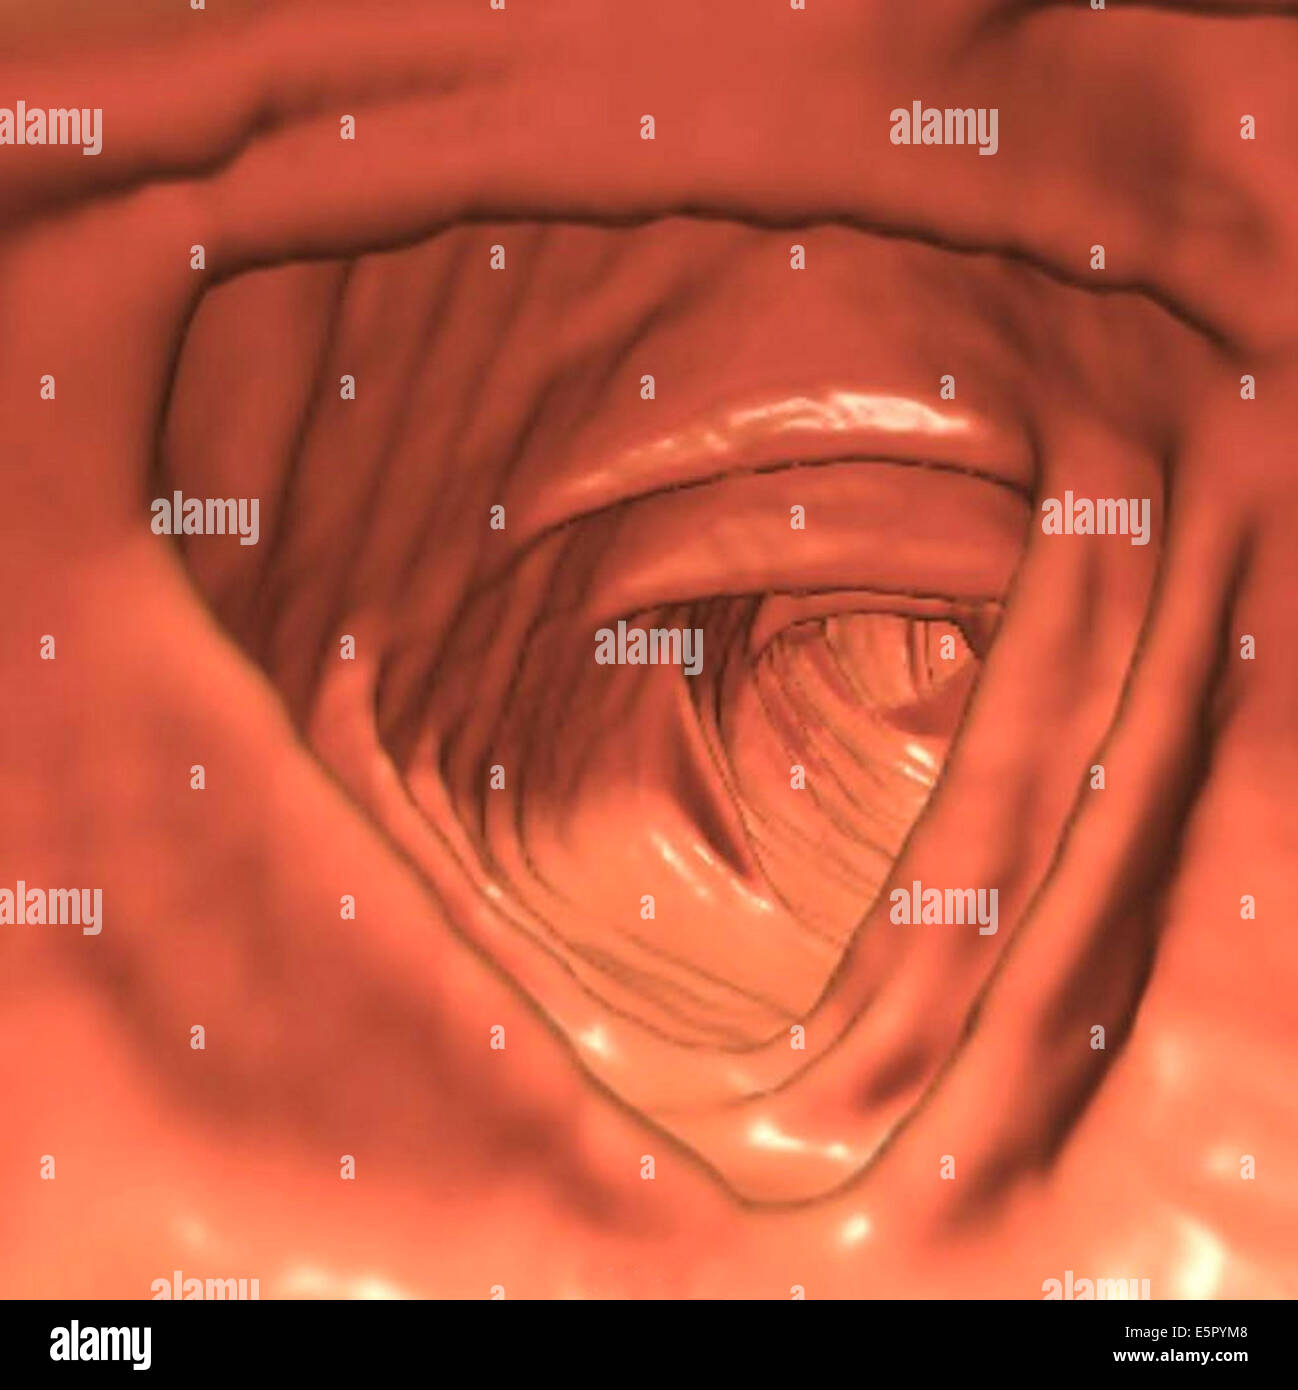 A 3D computed tomography (CT) scan of a healthy left colon. Stock Photo